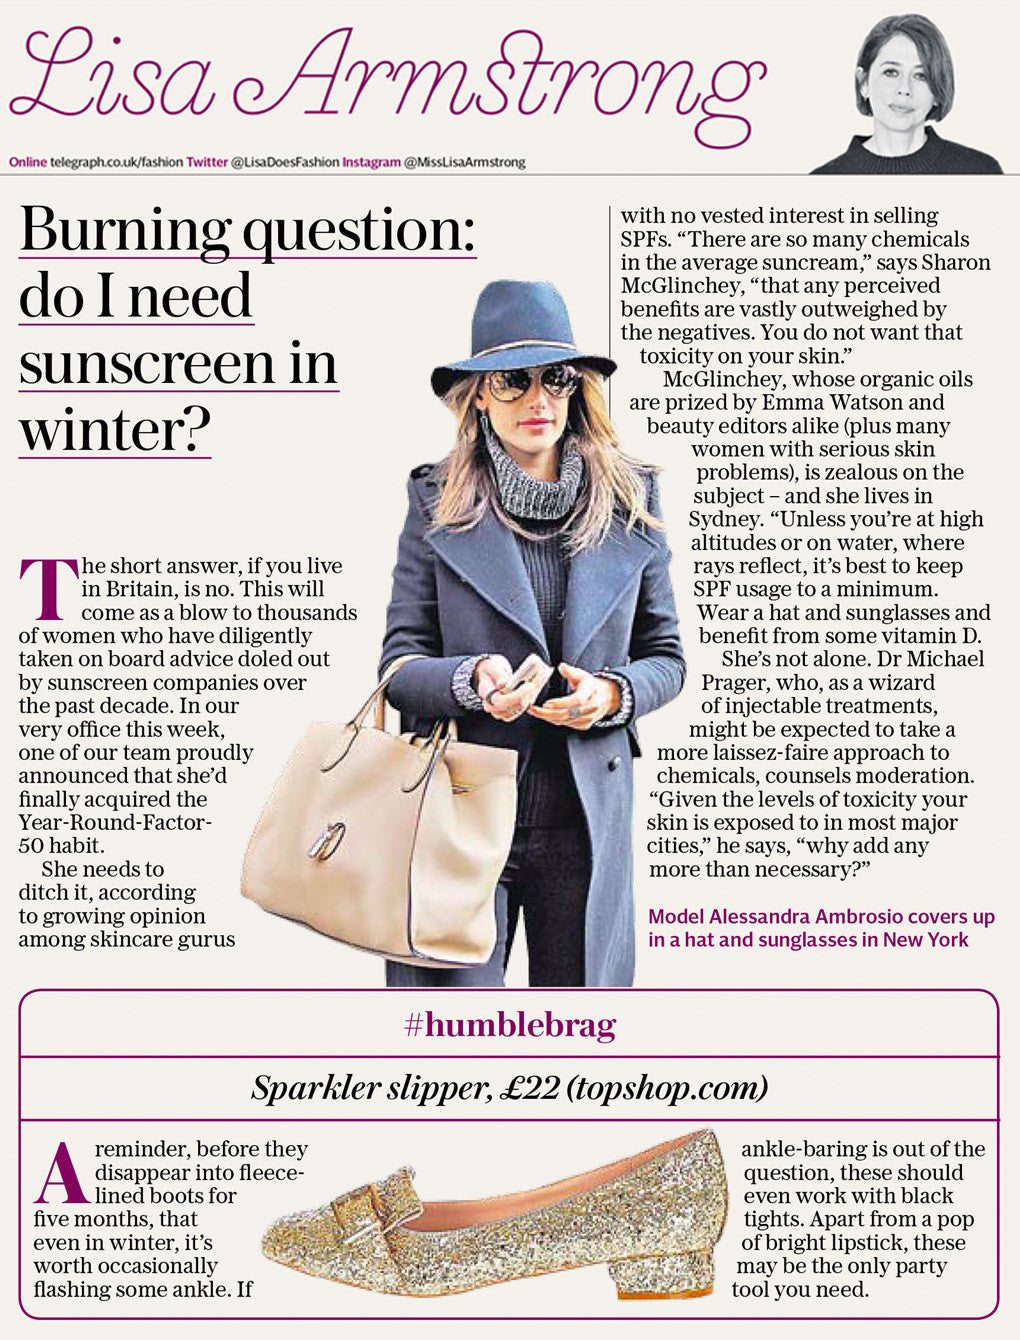 The Telegraph: Burning Question - Do I need sunscreen in winter?